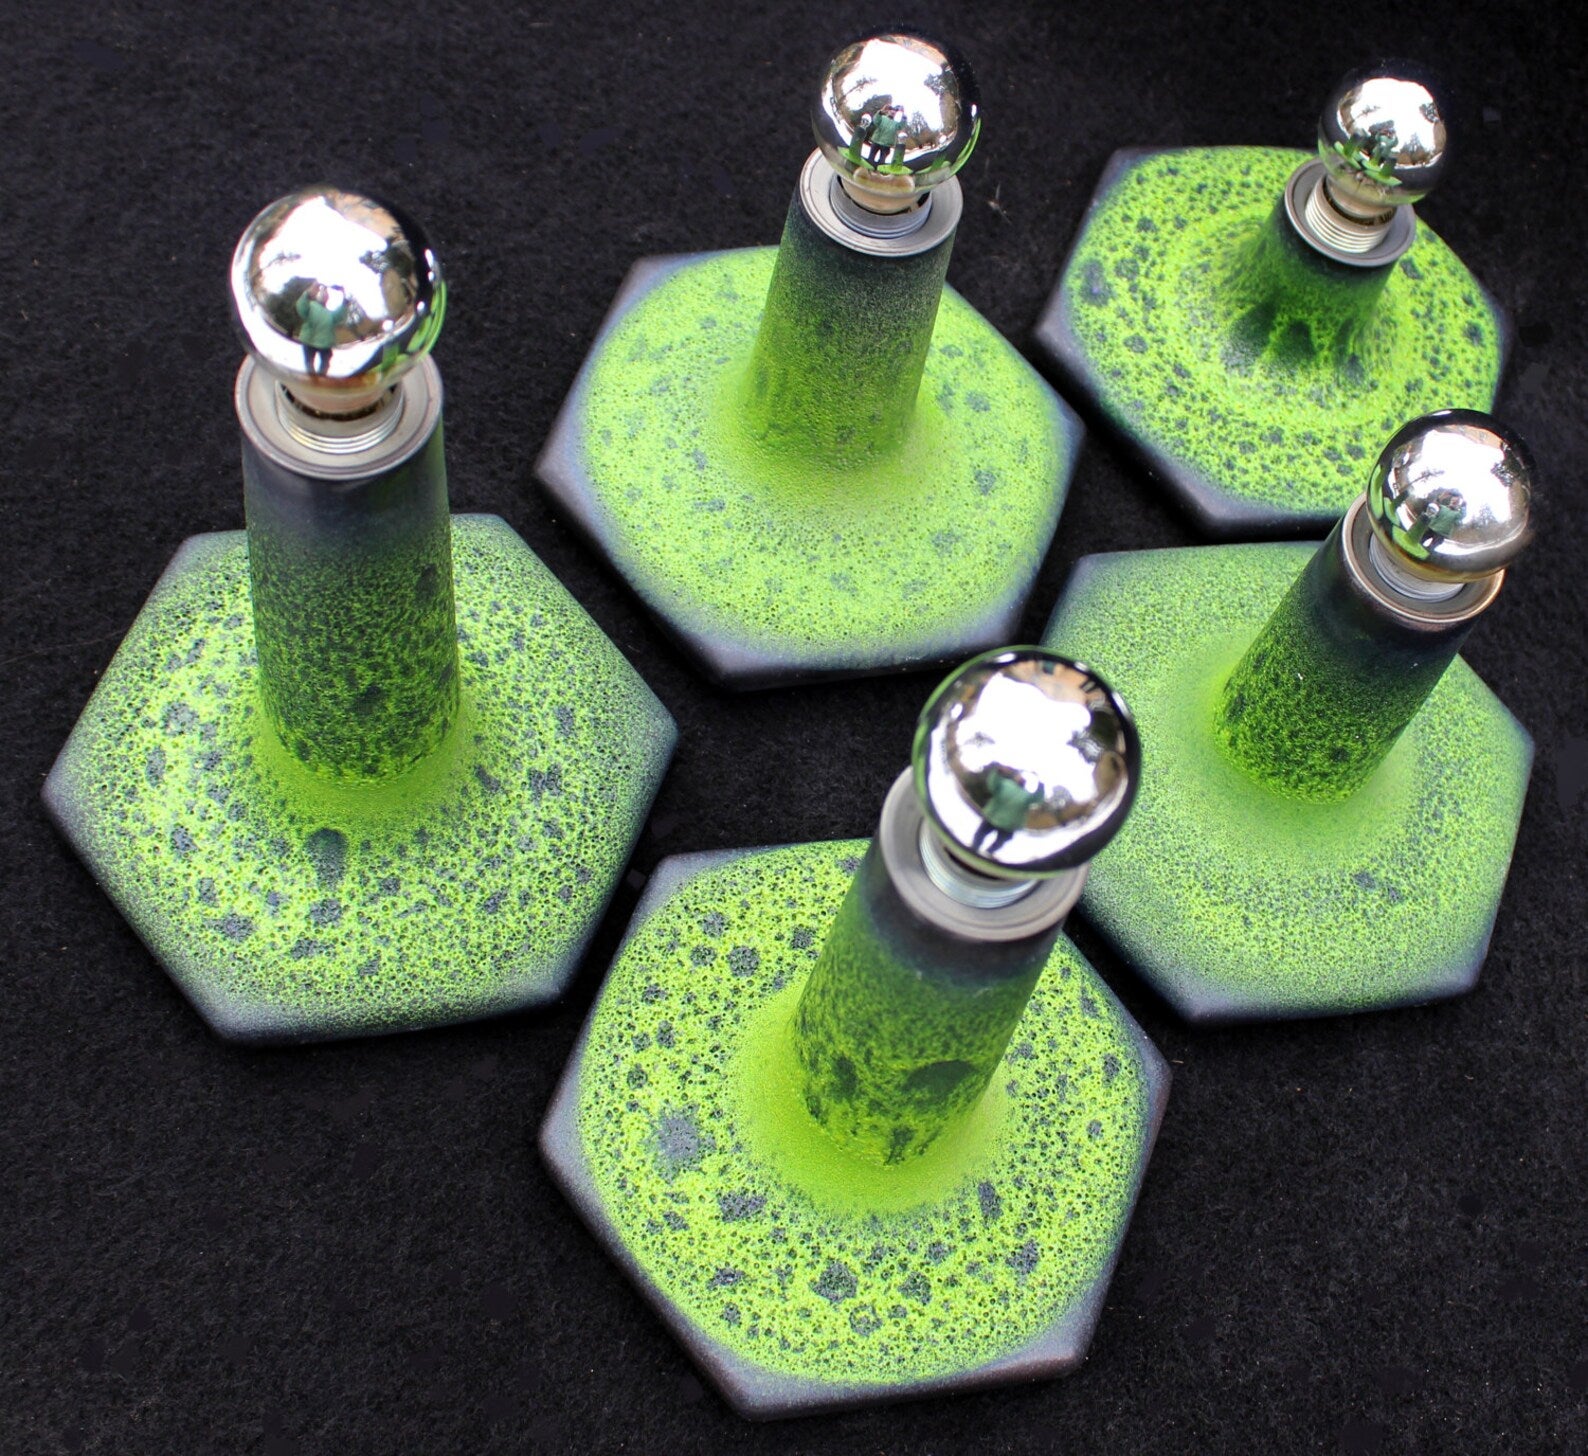 ENSEMBLE OF 5FAT (GREEN) LAVA FANTASTIC GERMAN STUDIO POTTERY SCONCES IN FINE GREEN NUANCED GLAZE. PLEASE CONSIDER THAT THE MEASUREMENTS OF THE SCONCES VARY

This spectacular designed and coloured ensemble of sconces is in nearly perfect